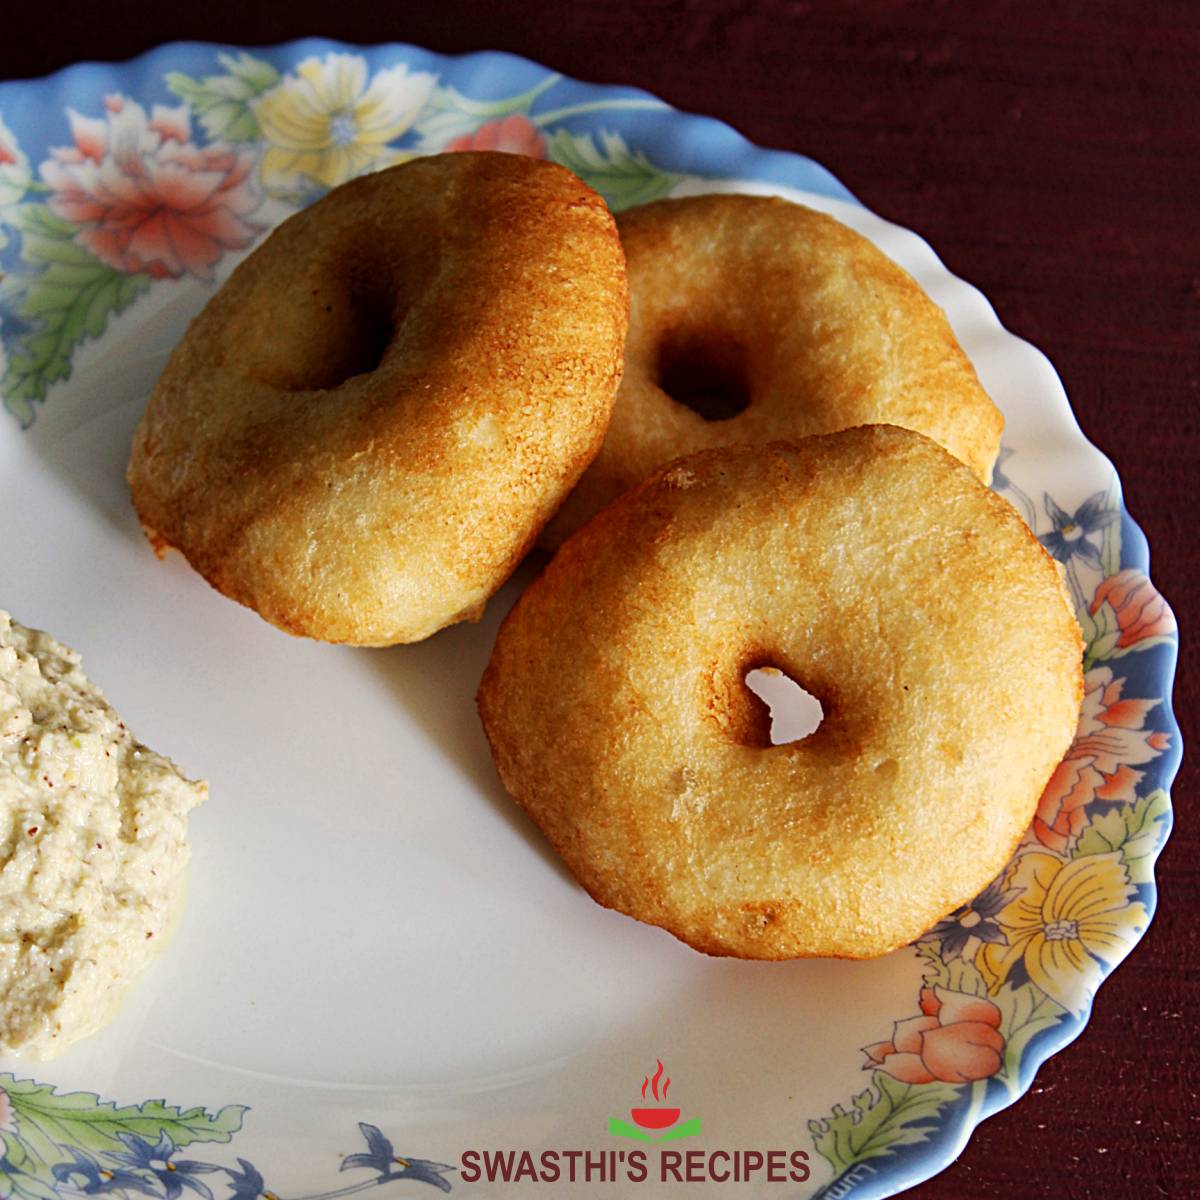 medu vada also known as garelu served  with chutney